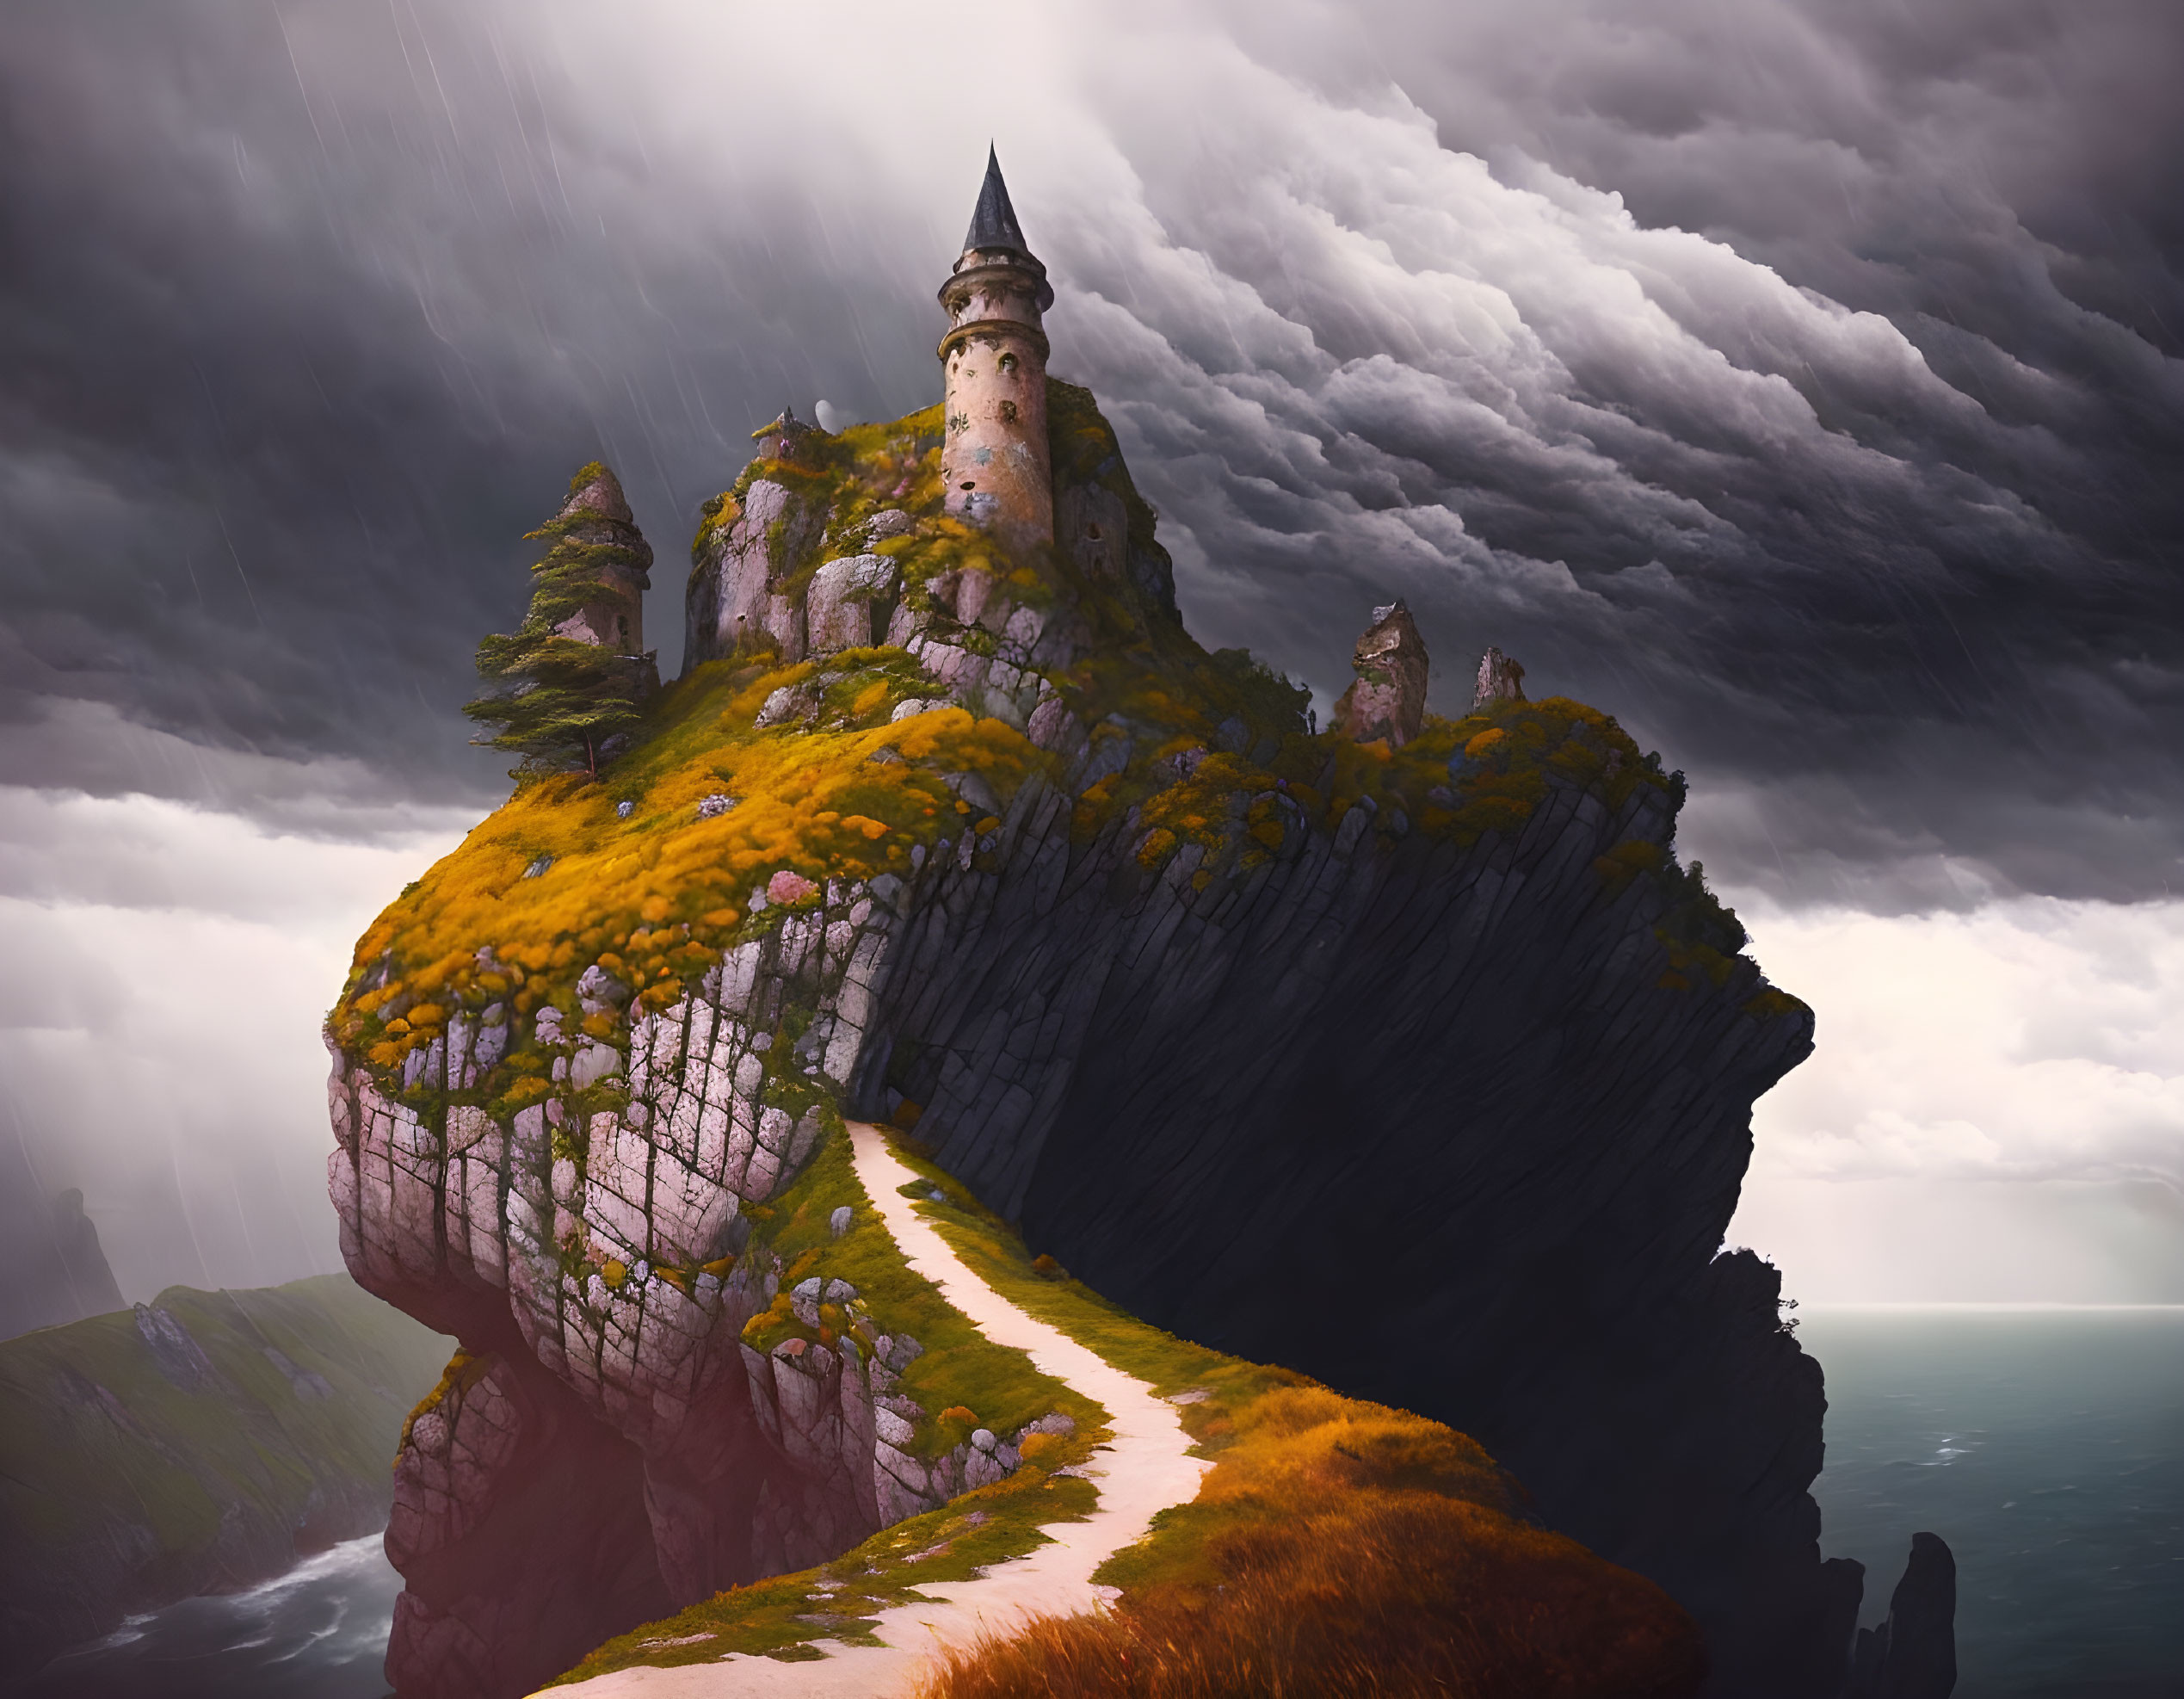  Sorcerer's tower on a cliff